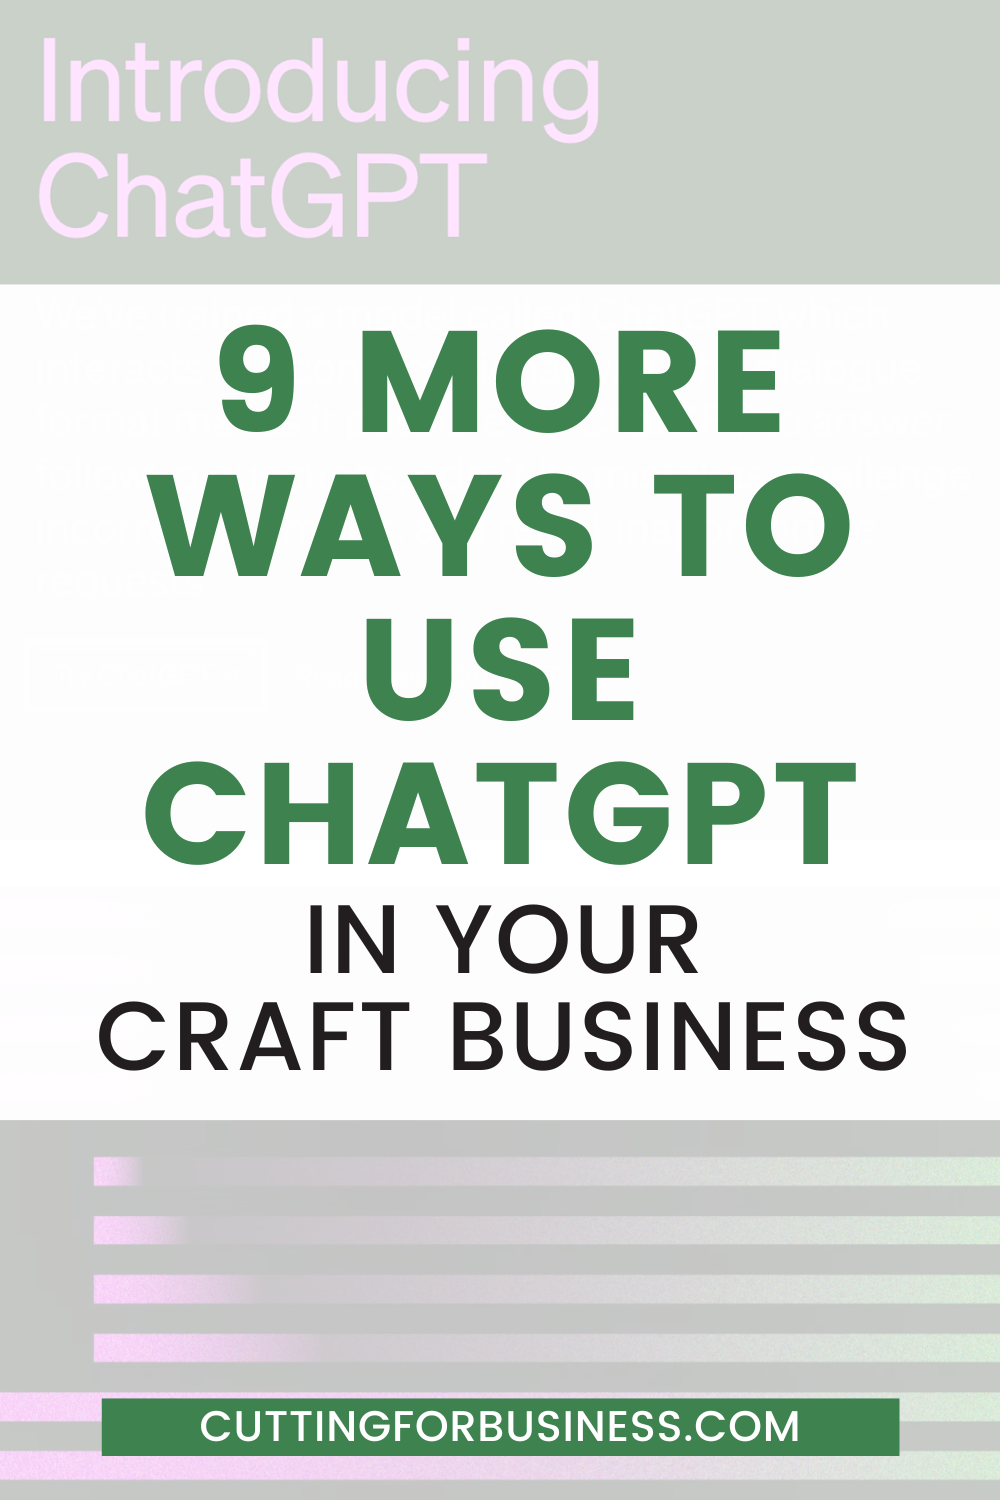 9 More Ways to Use ChatGPT in Your Craft Business - cuttingforbusiness.com.